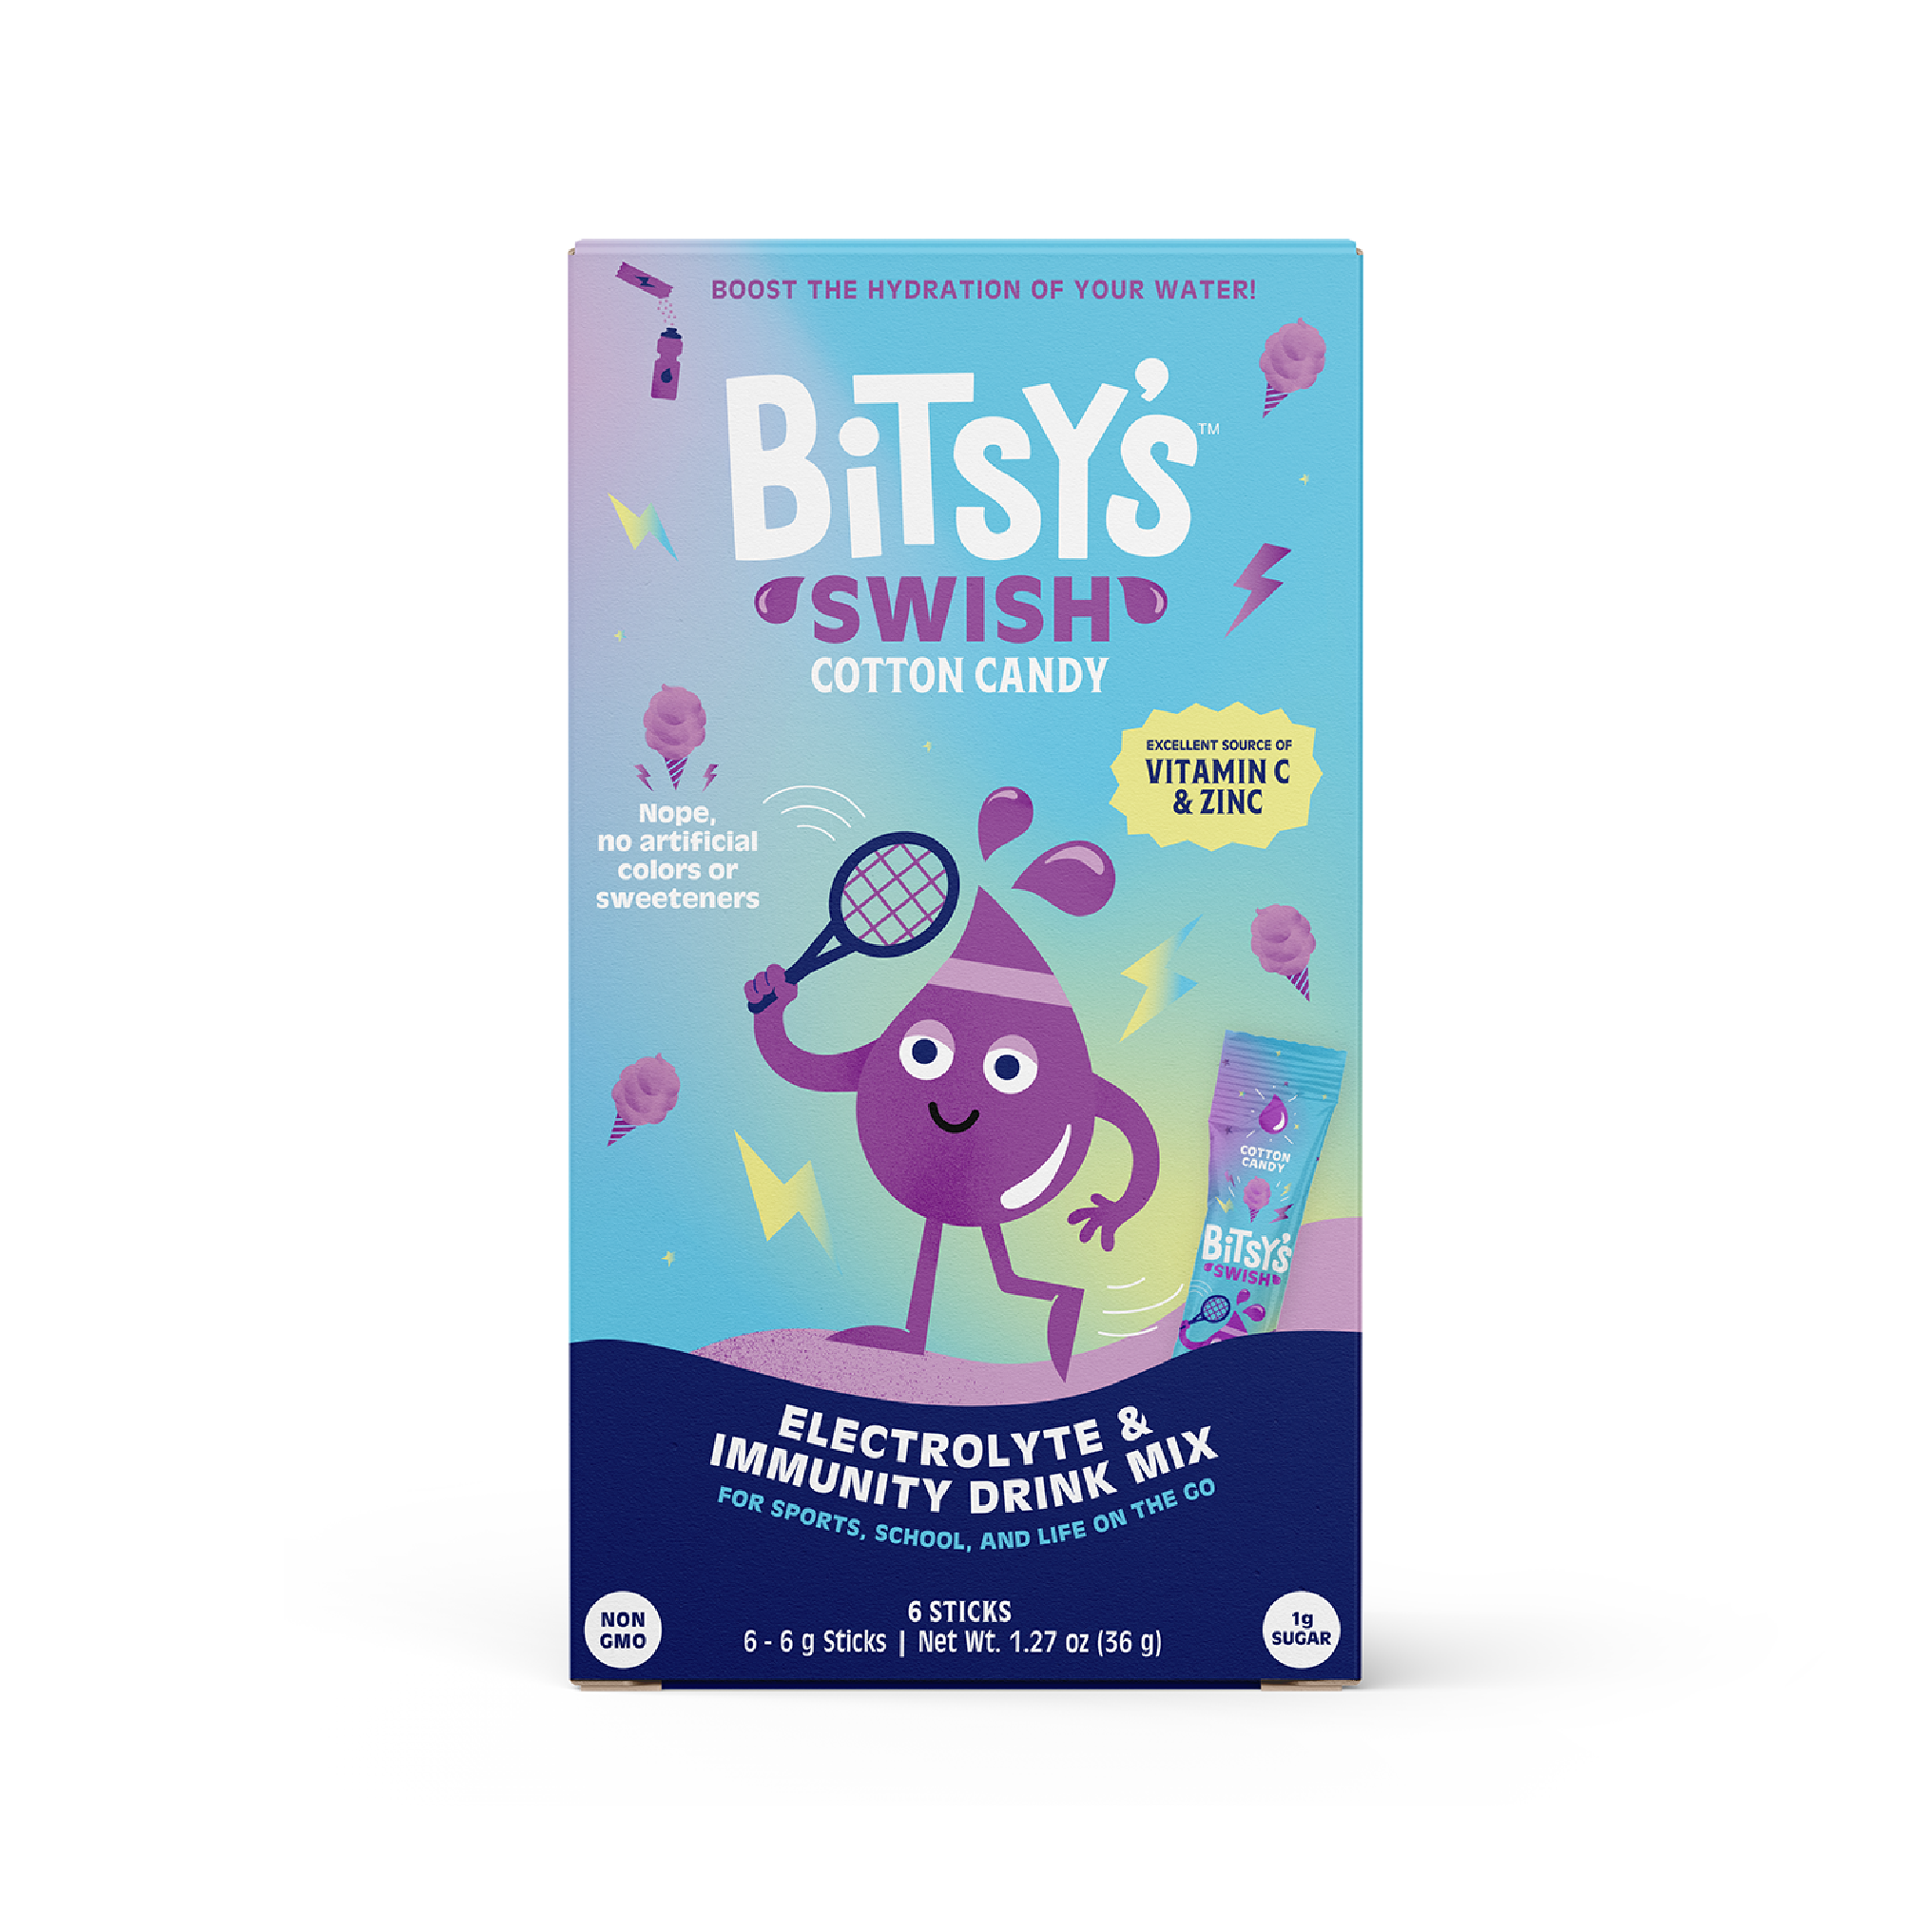 Bitsy's Swish Cotton Candy Electrolyte and Immunity Sports Drink Mix for Kids, Vitamin C and Zinc Hydration Powder, 6 Packets - image 1 of 7